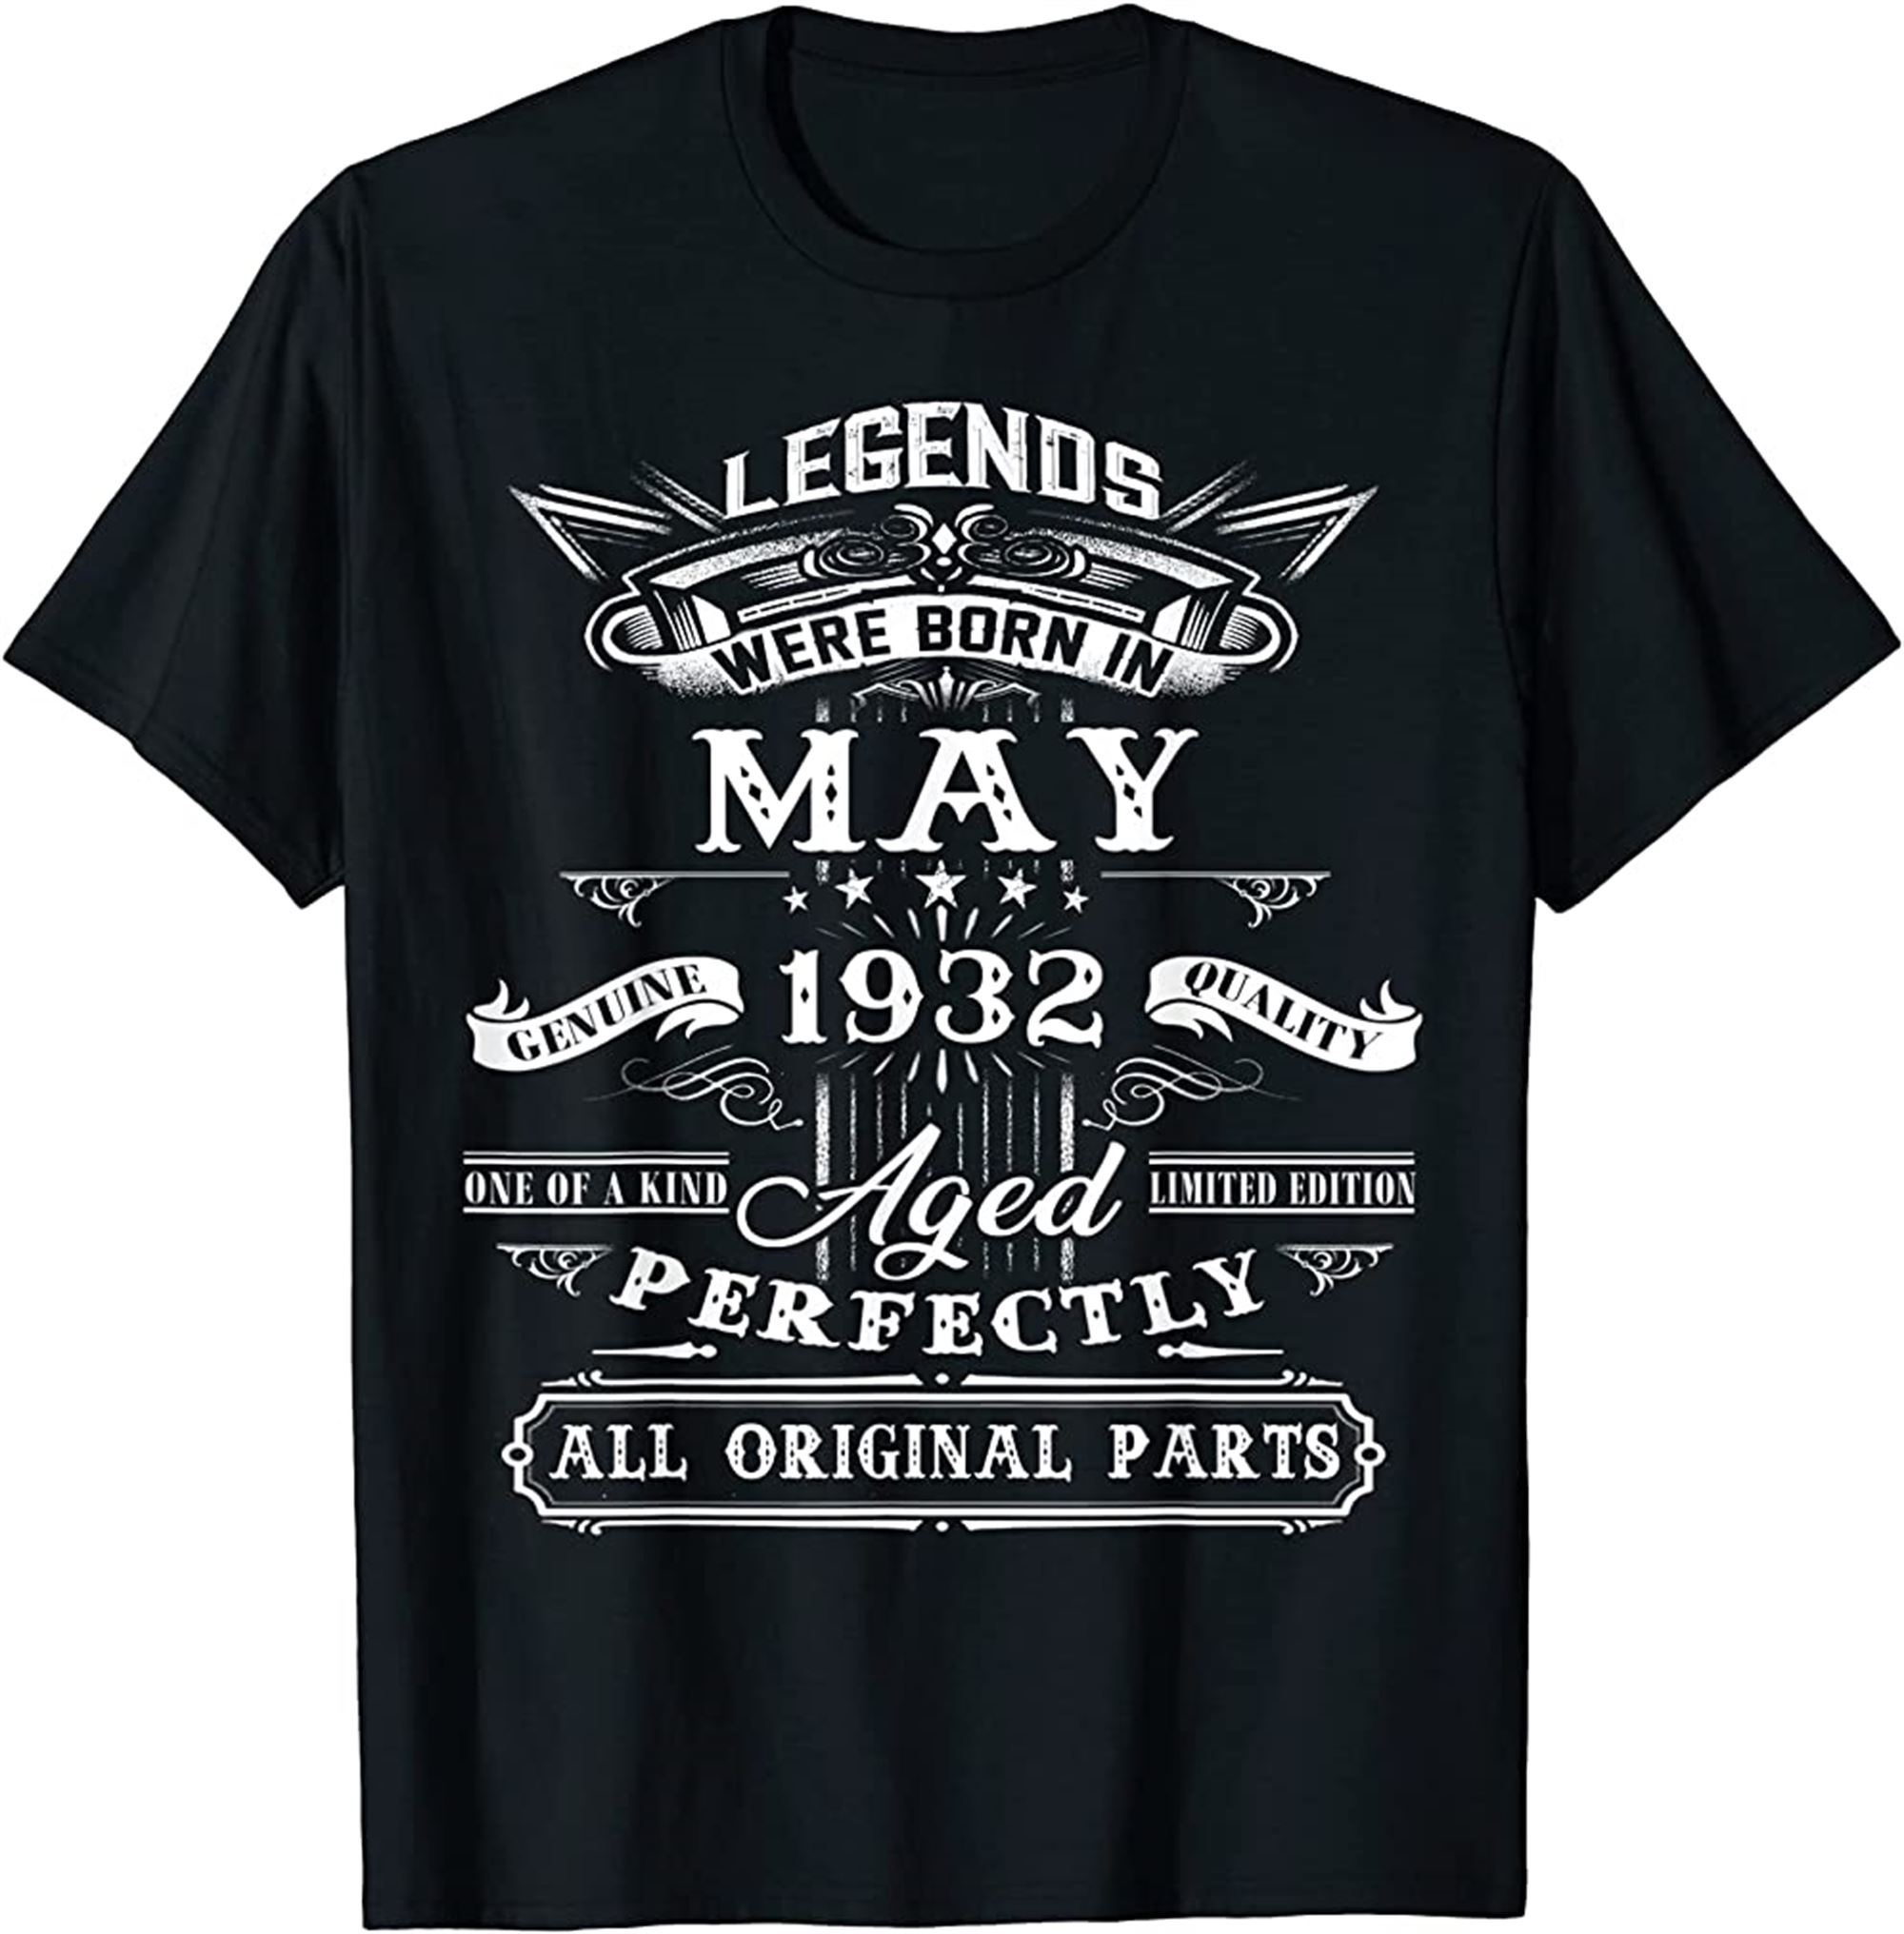 Mens 90th Birthday Gift For Legends Born May 1932 90 Years Old T-shirt Full Size Up To 5xl